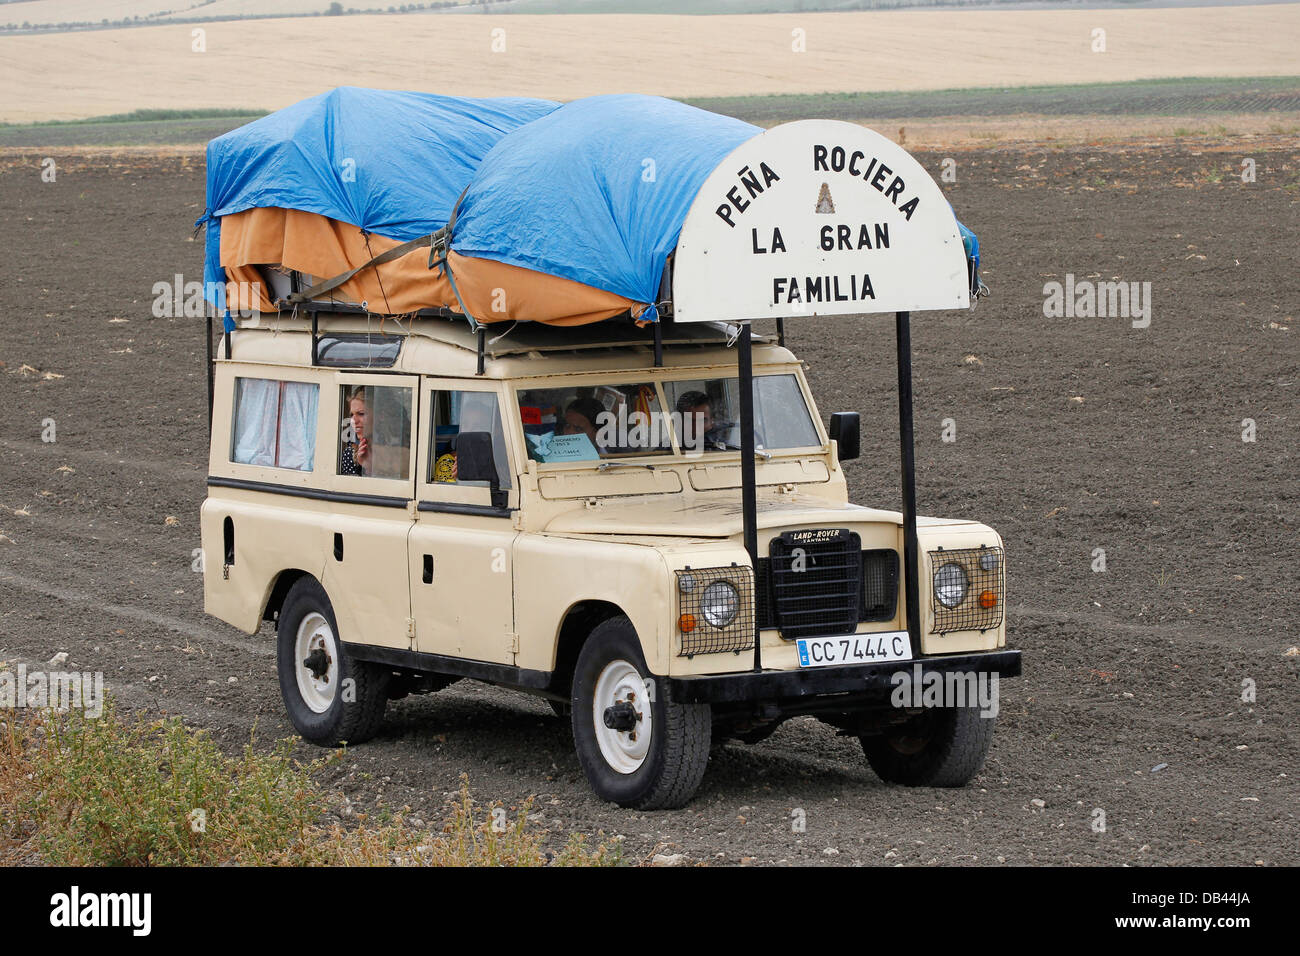 Landrover making the annual pilgrimage to El Rocio in southern Spain Stock Photo